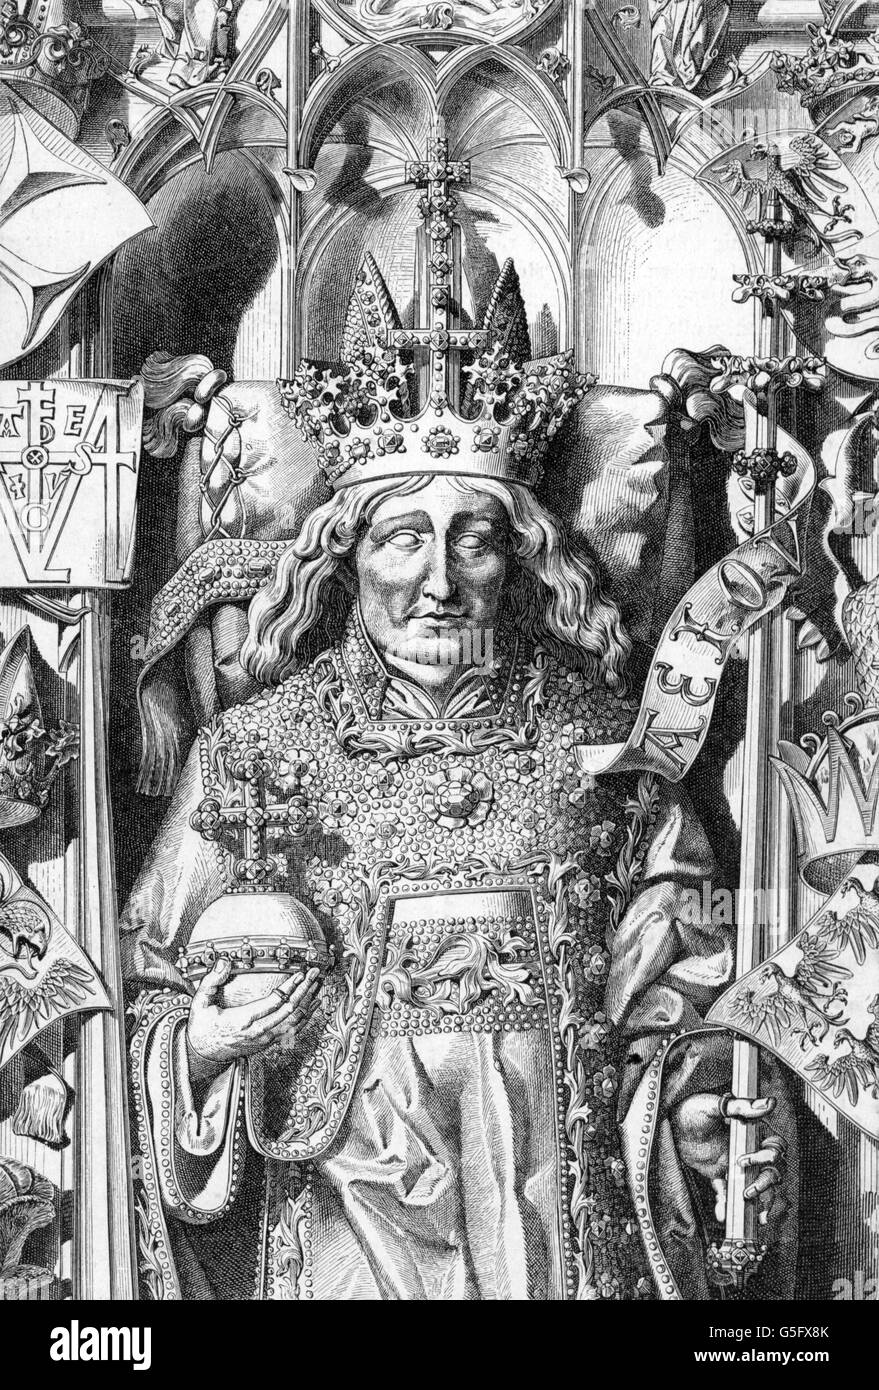 Frederick III "the Peaceful", 21.9.1415 - 19.8.1493, Holy Roman Emperor 16.3.1452 - 19.8.1493, half length, sculpture, grave in St. Stephan's Cathedral, Vienna, 1493, wood engraving, 19th century, Stock Photo